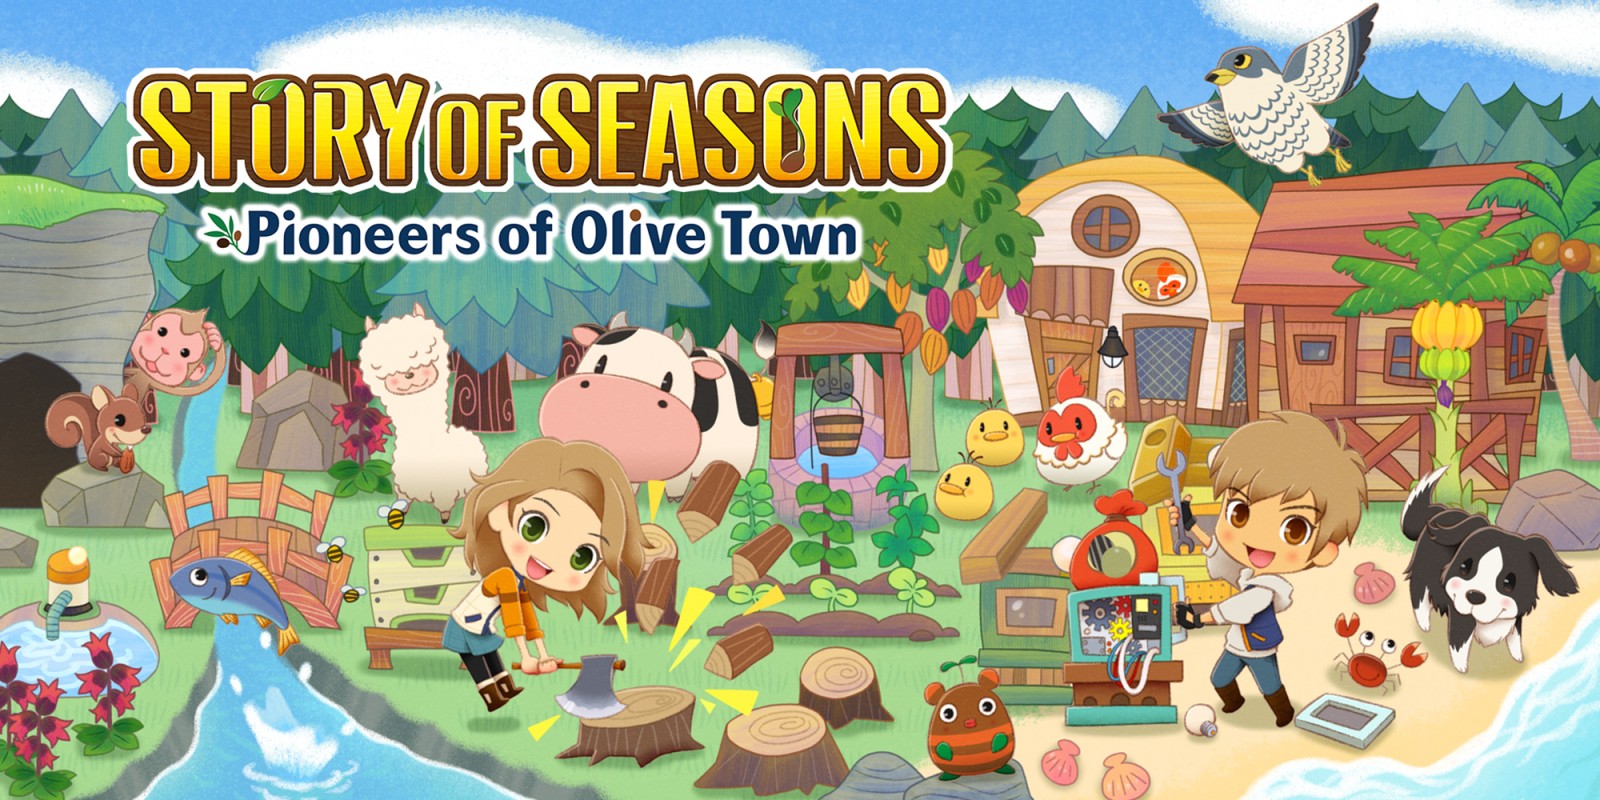 Story of Seasons: Pioneers of Olive Town updated to Version 1.1.0